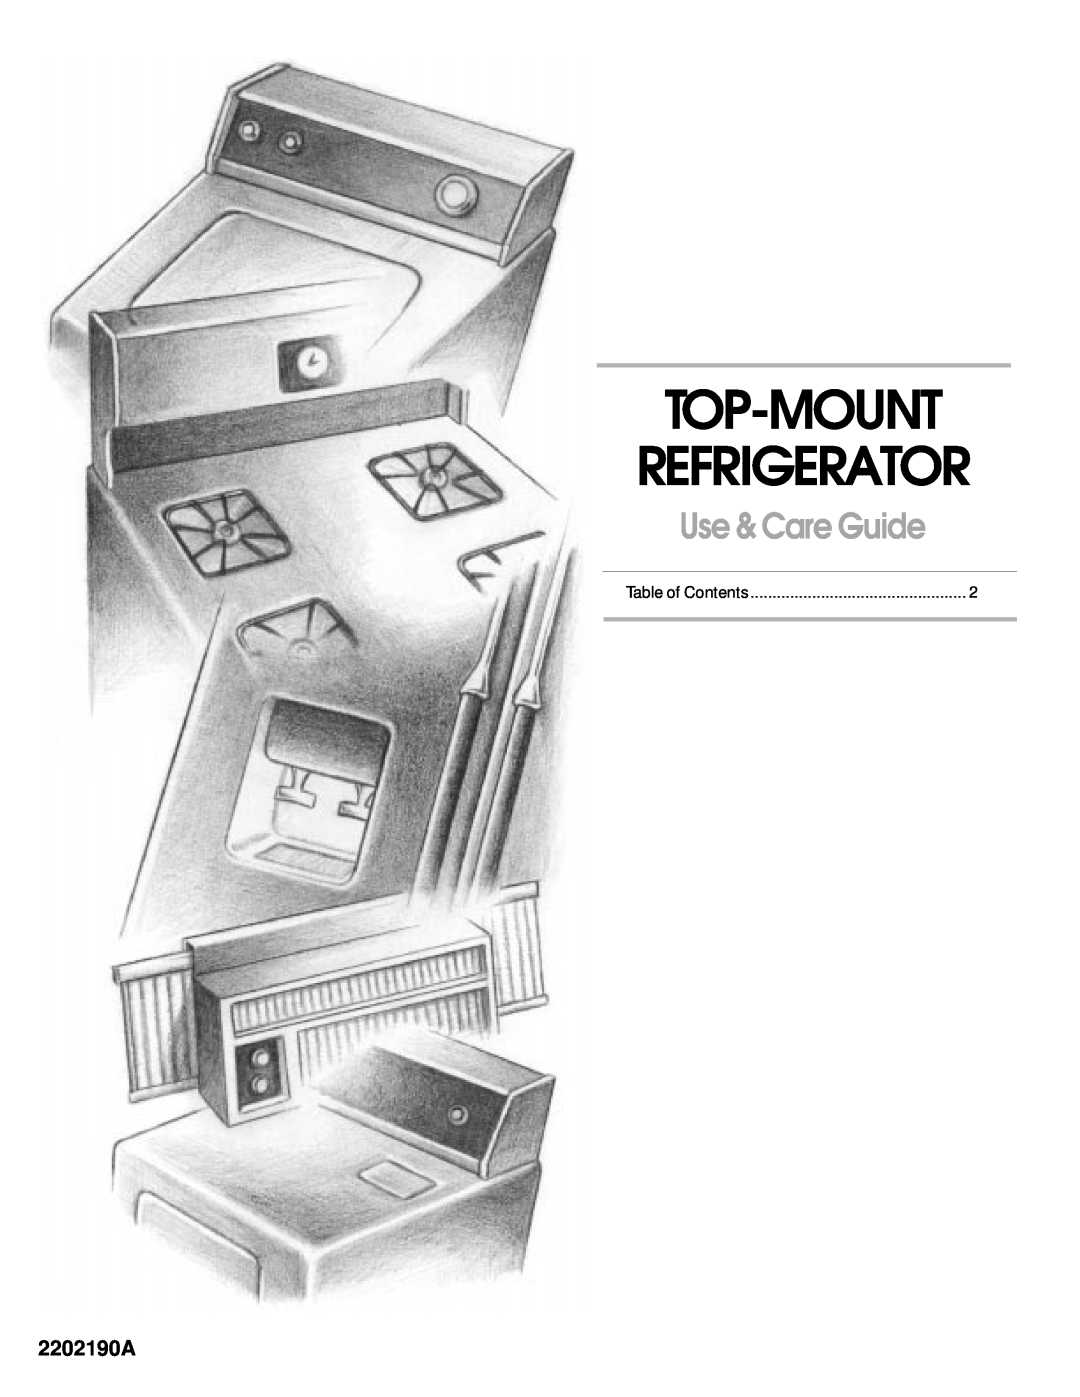 Whirlpool ST14CKXHW00 manual Top-Mount Refrigerator, Use & Care Guide, 2202190A 